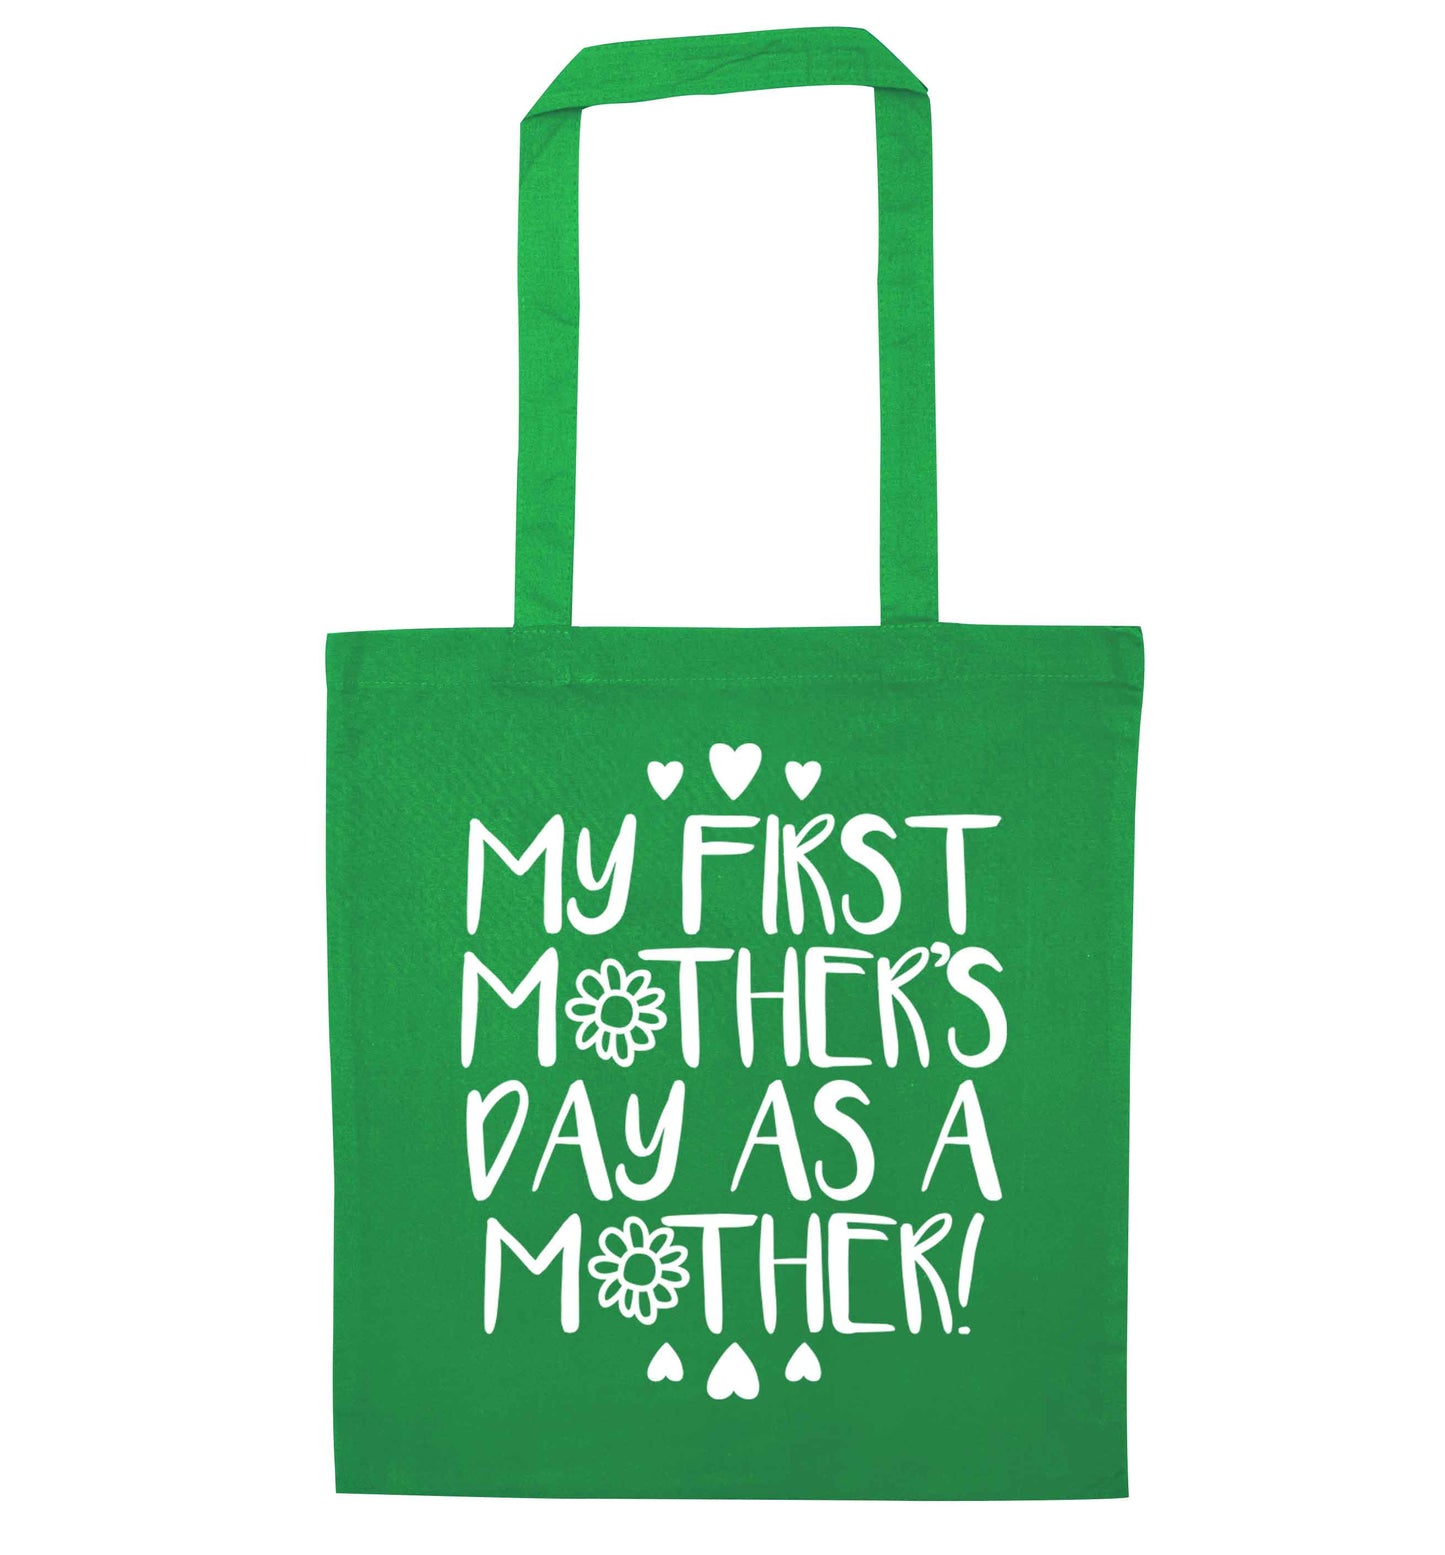 It's my first mother's day as a mother green tote bag